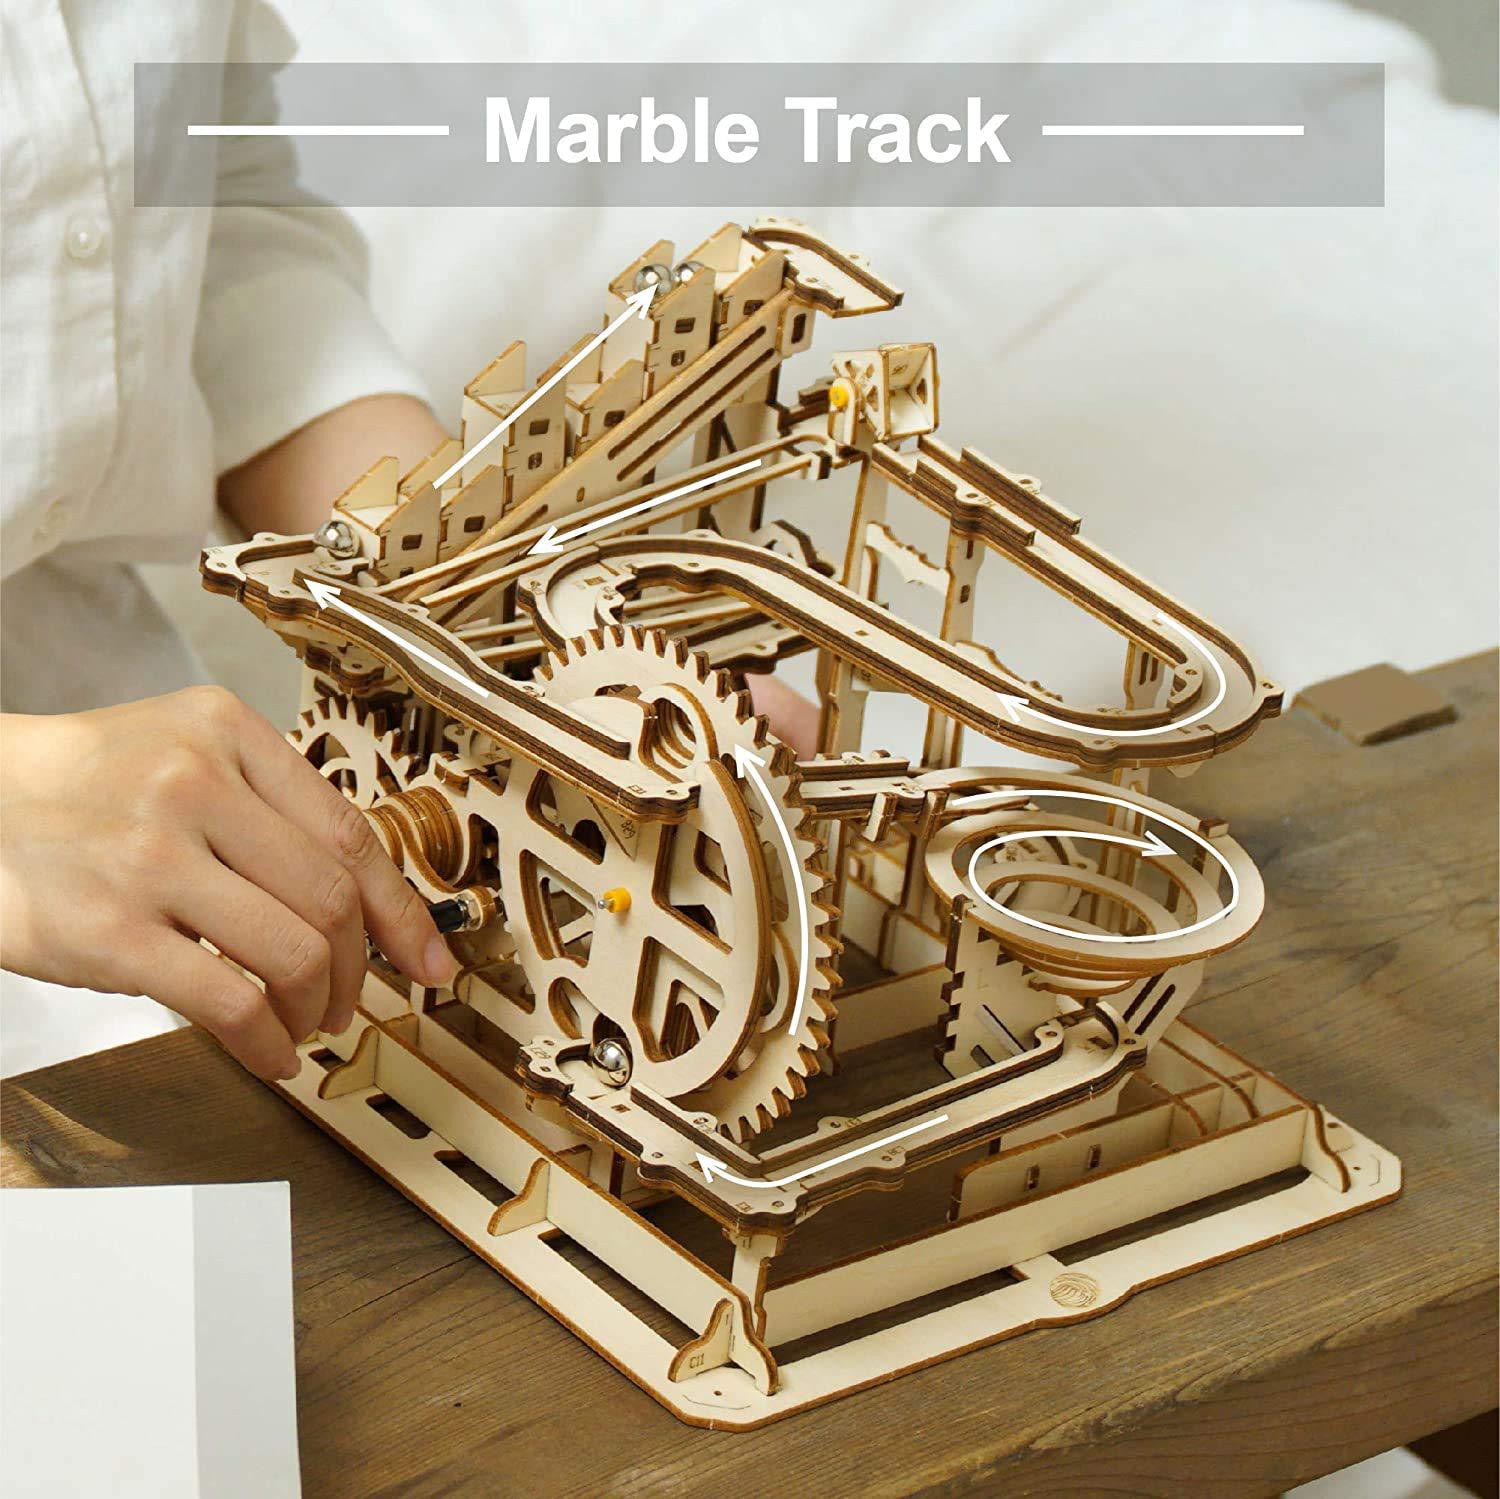 rokr 3d puzzles for adults,wooden marble run,3d wooden puzzles for adults kids ages 12-14,wood puzzles adult,model kits for a